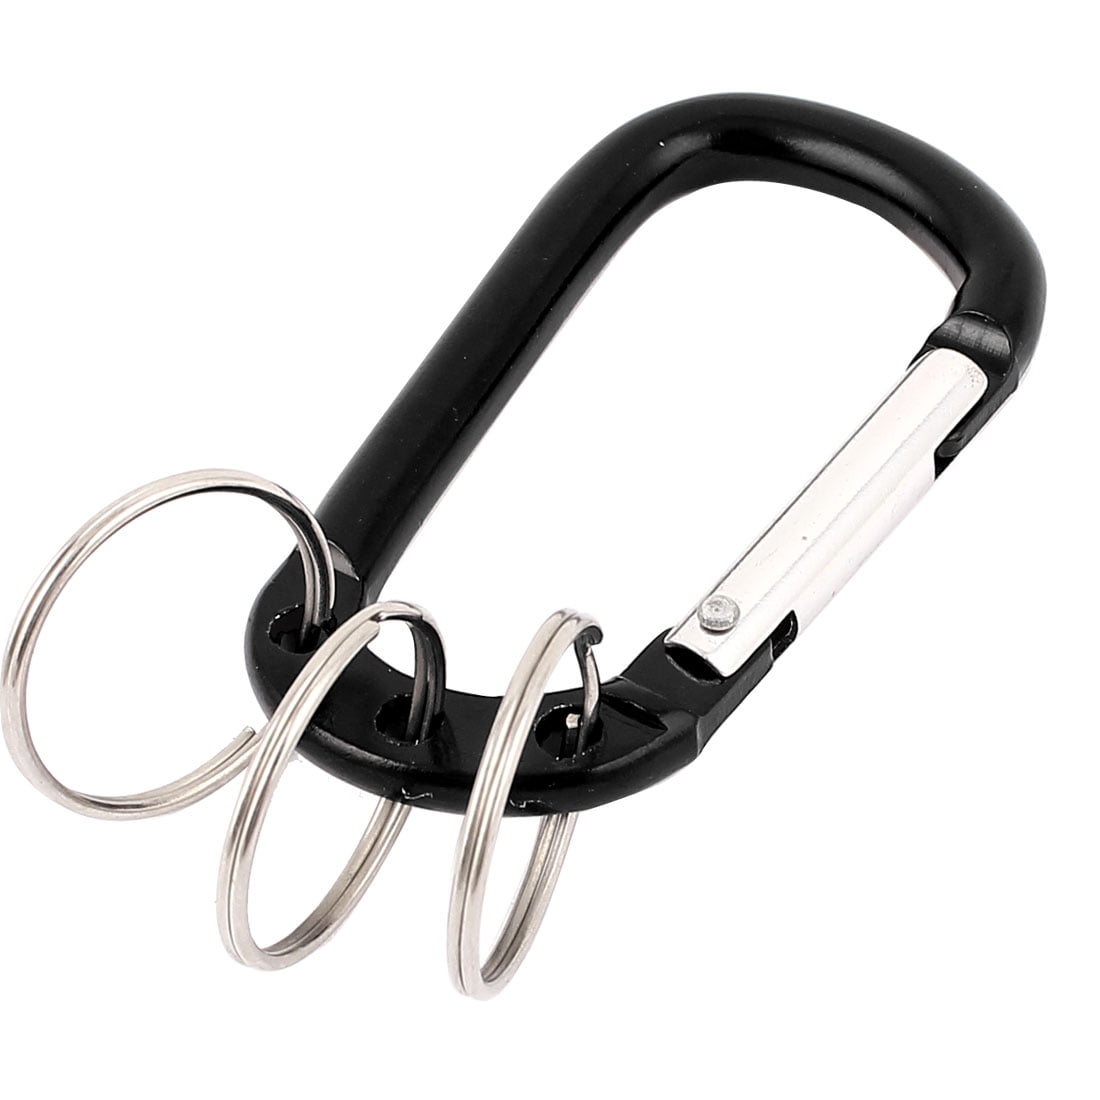 1 X Stainless Steel Key Chain Clip Hook Buckle Keychain Ring Climbing Carabiner 